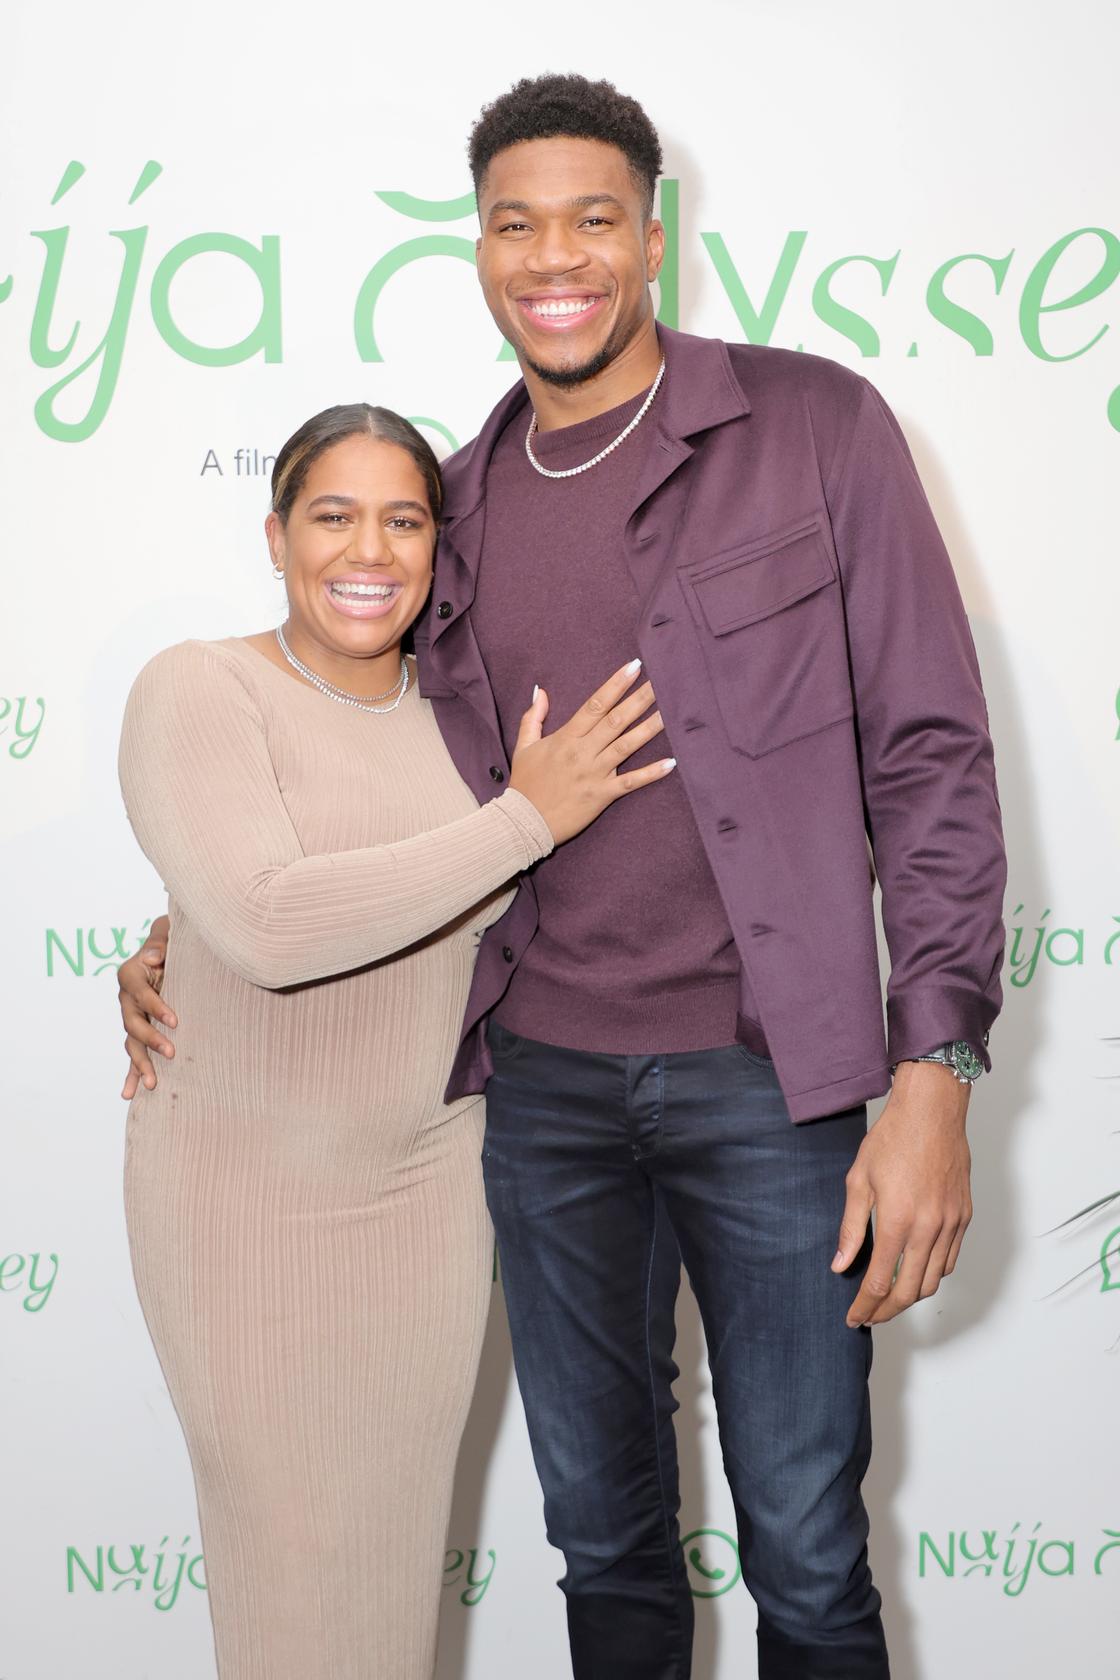 Who Is Giannis Antetokounmpo's Fiancée? All About Mariah